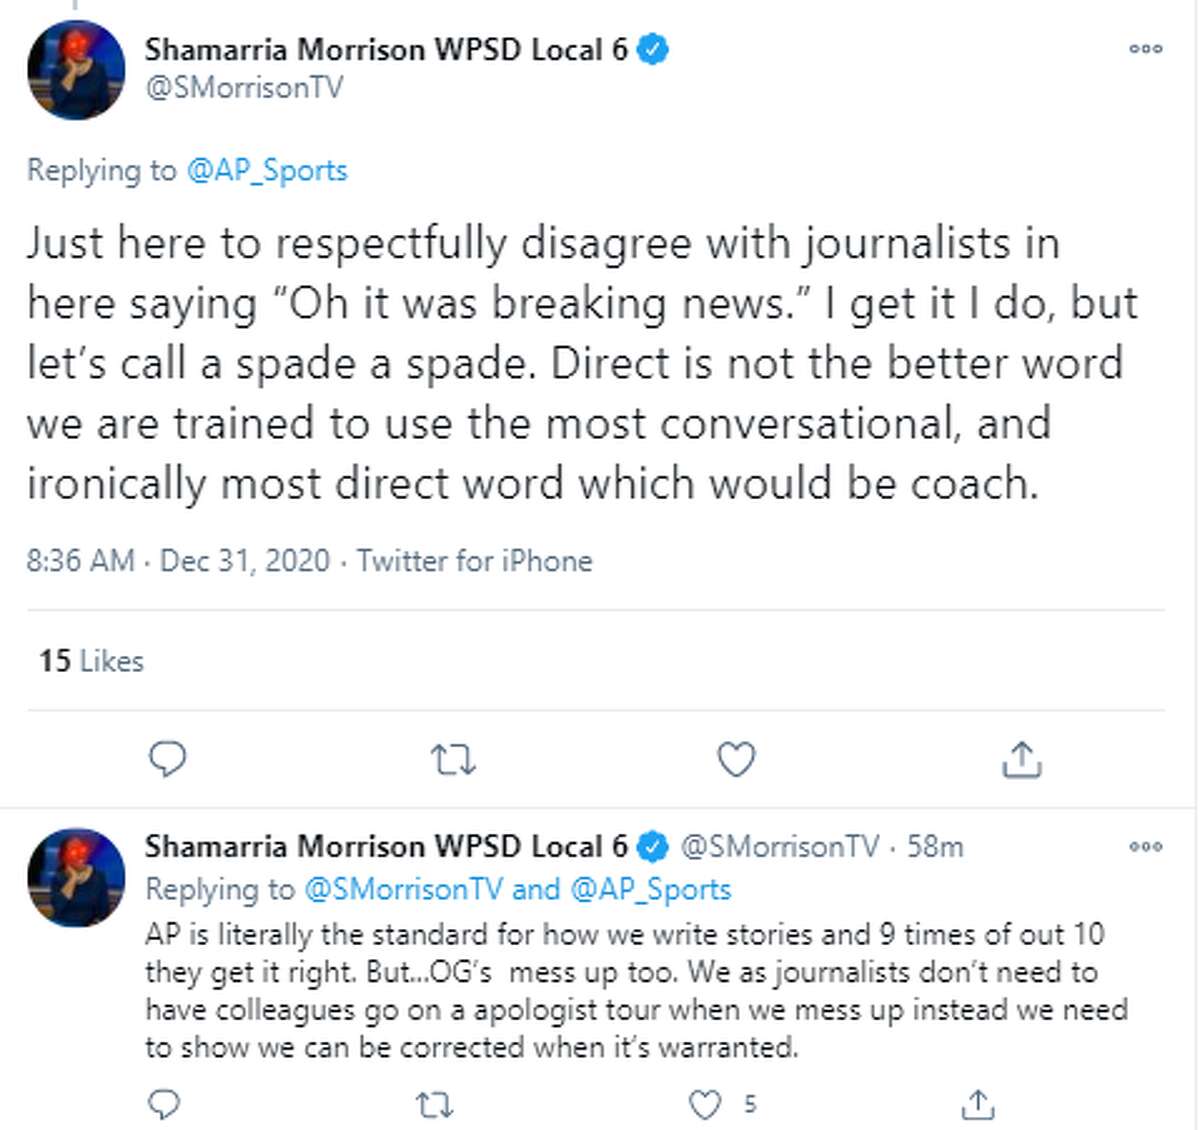 @SMorrsonTV: Just here to respectfully disagree with journalists in here saying “Oh it was breaking news.” I get it I do, but let’s call a spade a spade. Direct is not the better word we are trained to use the most conversational, and ironically most direct word which would be coach. AP is literally the standard for how we write stories and 9 times of out 10 they get it right. But...OG’s  mess up too. We as journalists don’t need to have colleagues go on a apologist tour when we mess up instead we need to show we can be corrected when it’s warranted.